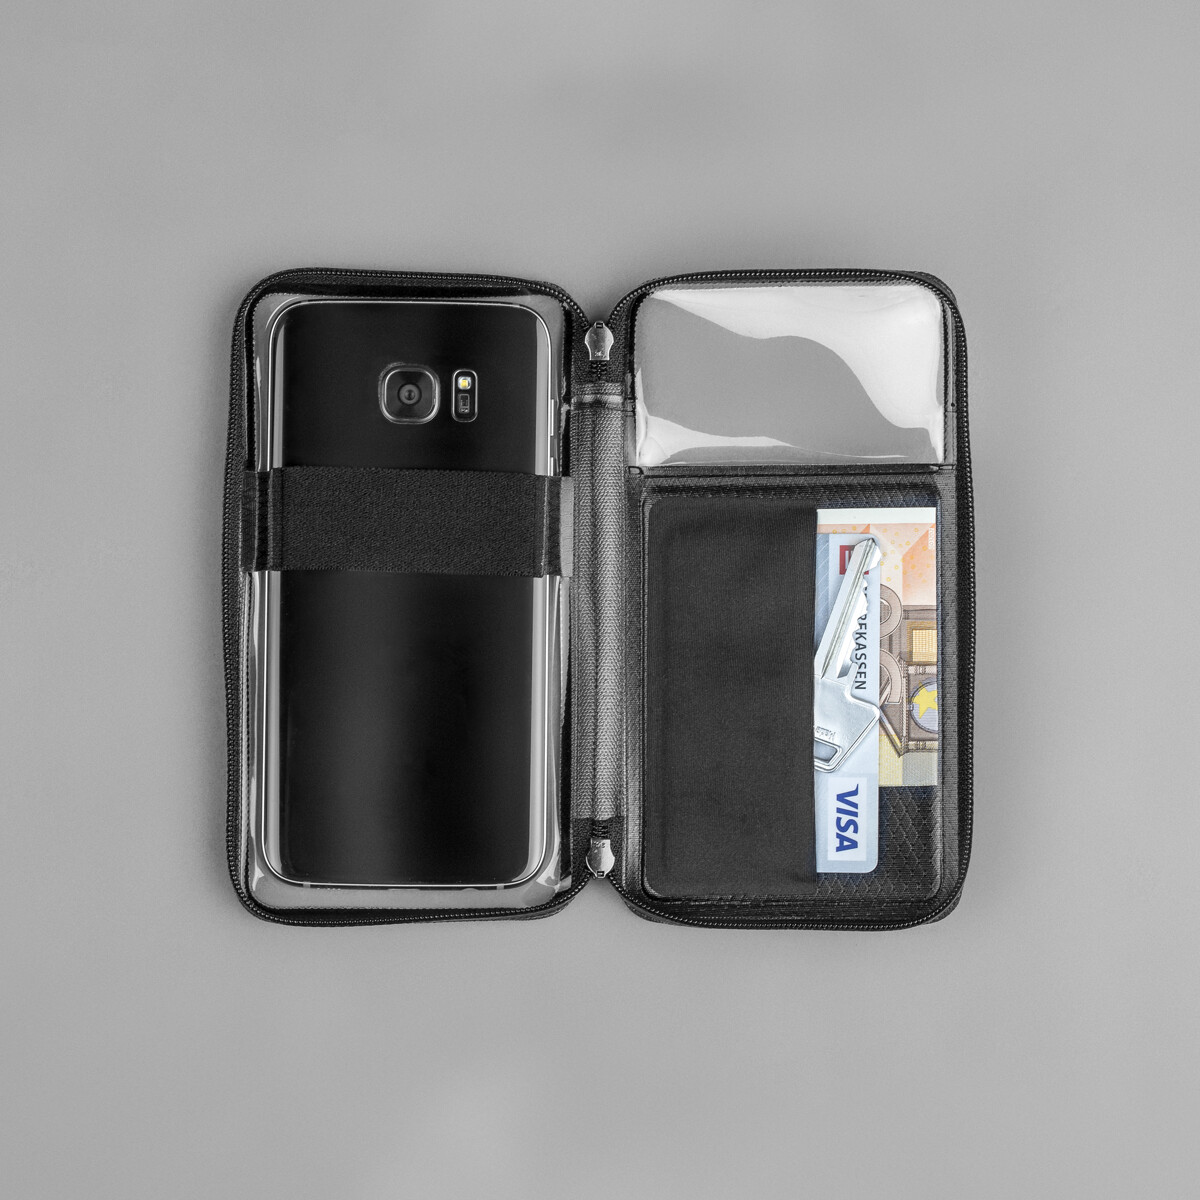 Gripgrab cycling wallet Iphone 6/7/8 | 900901001 | Køb her